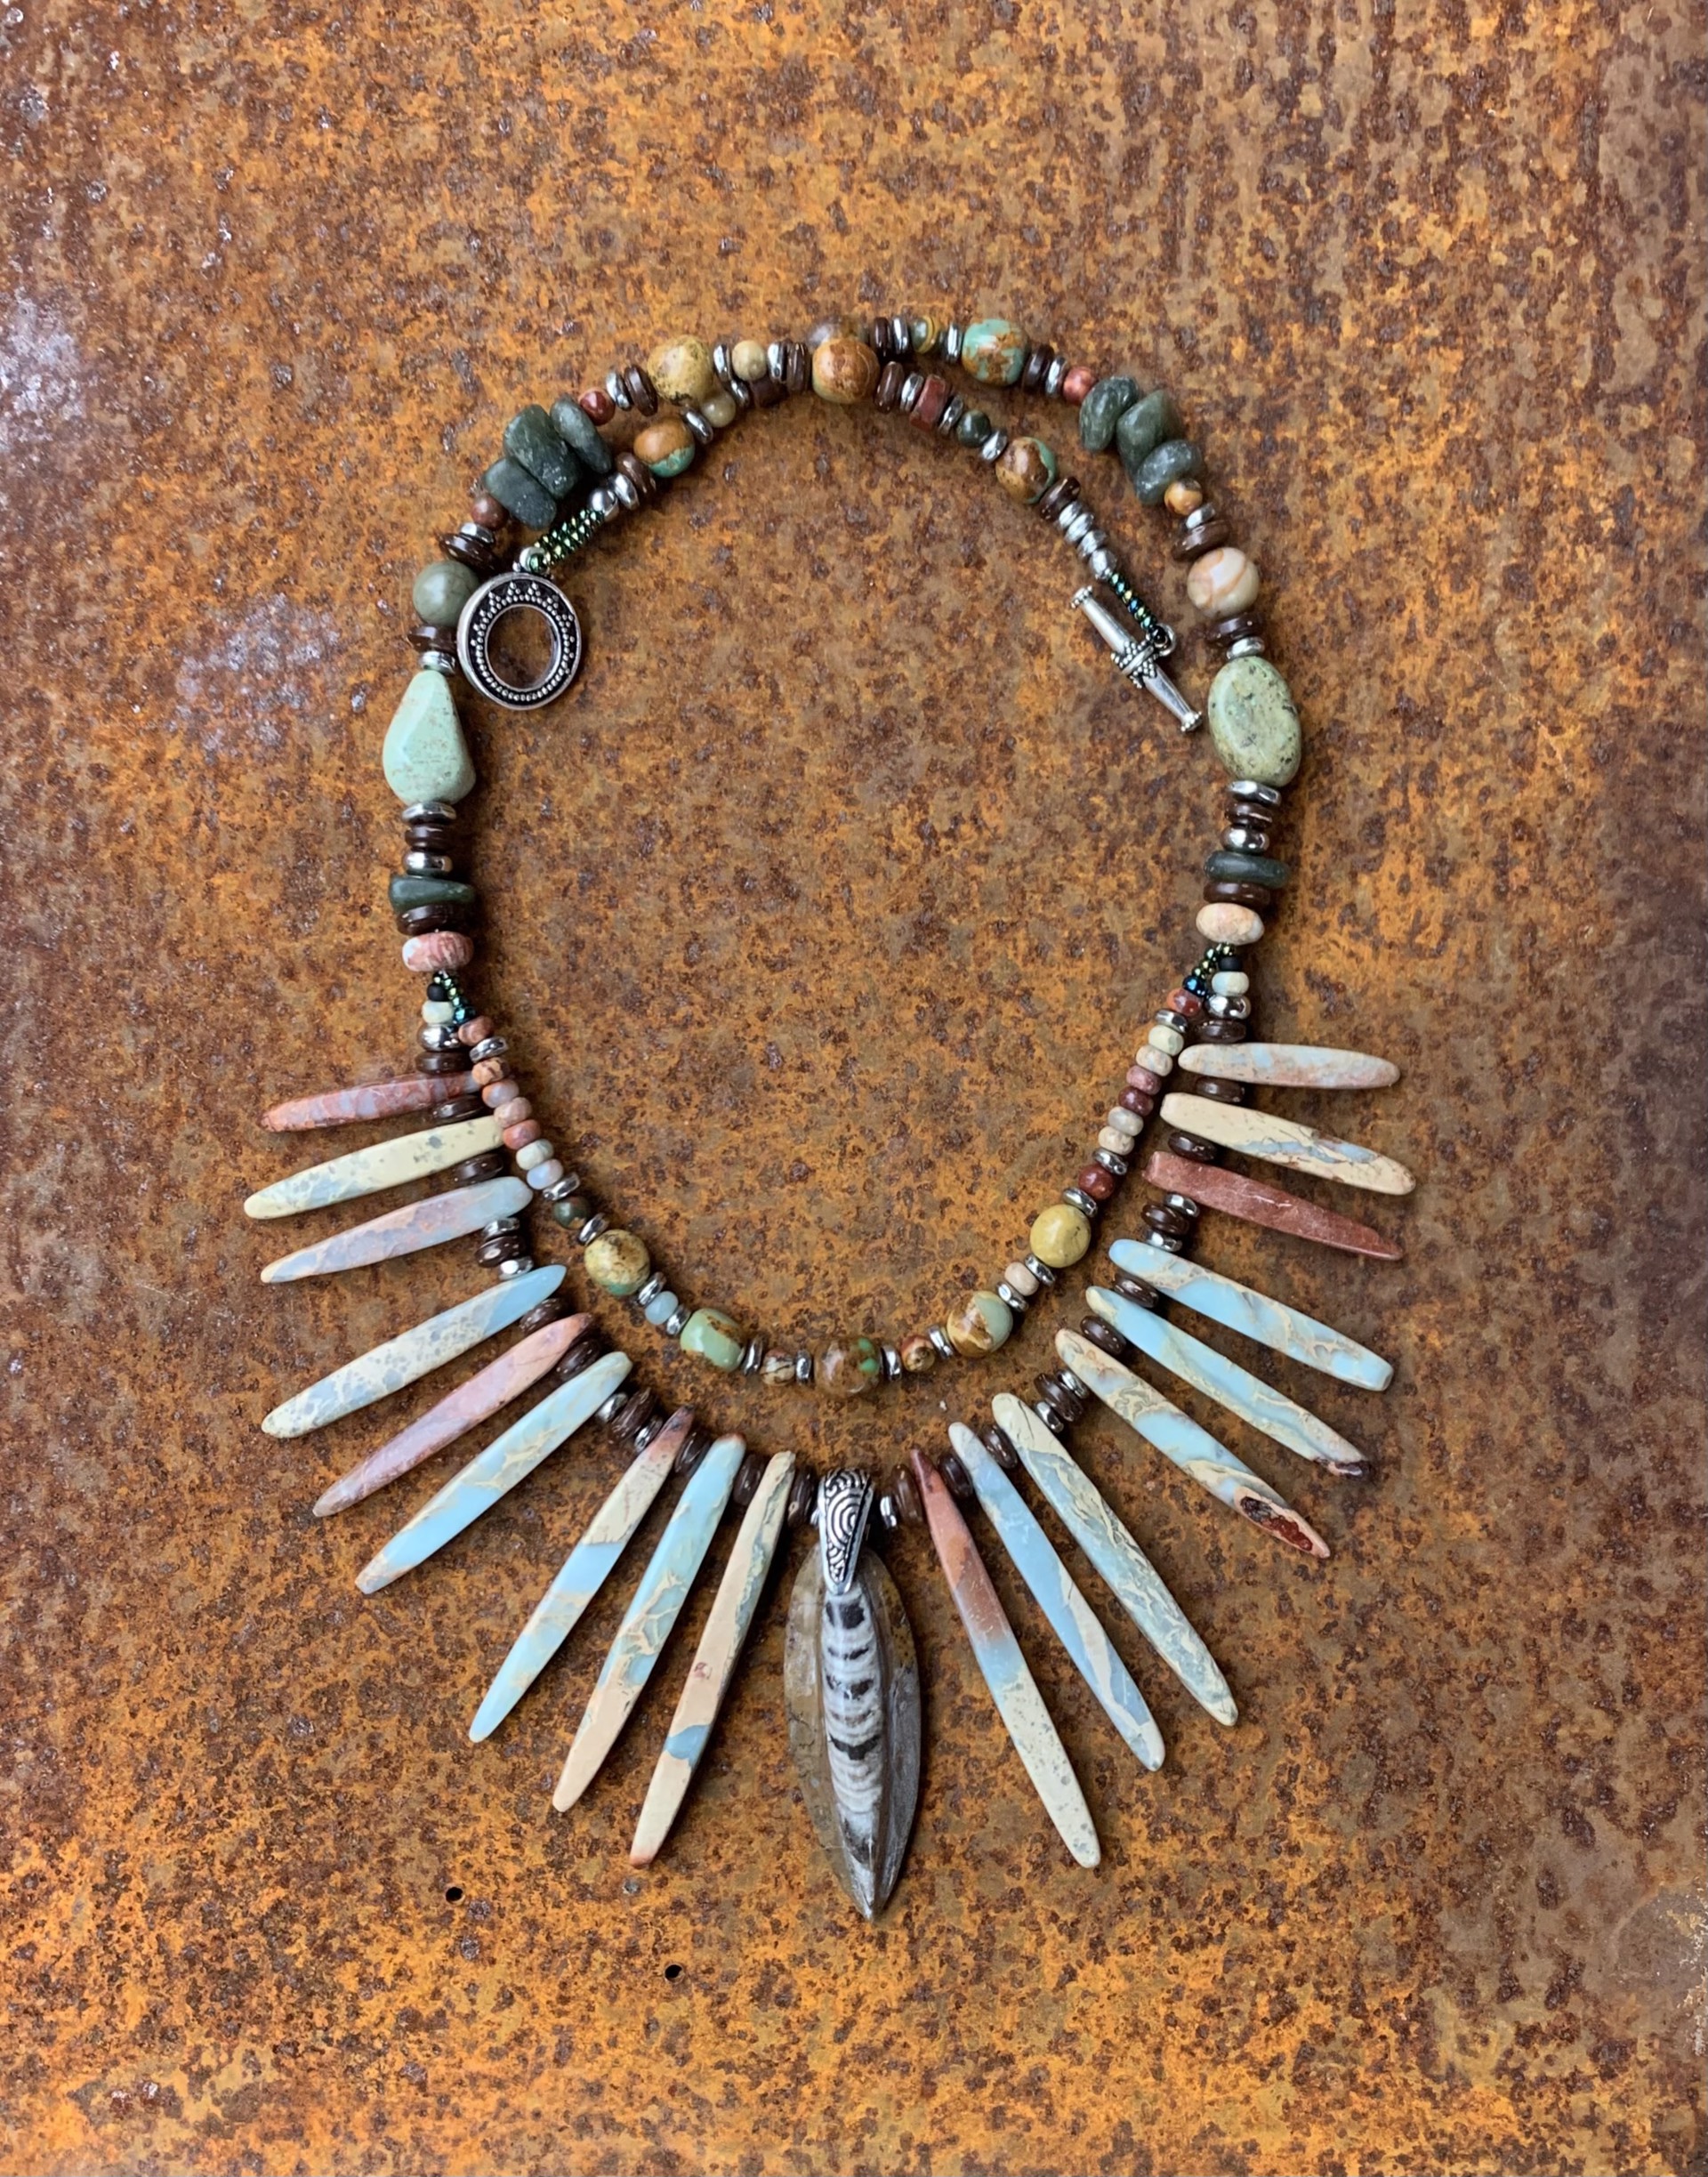 K594 Jasper Spike and Orthoceras Necklace by Kelly Ormsby